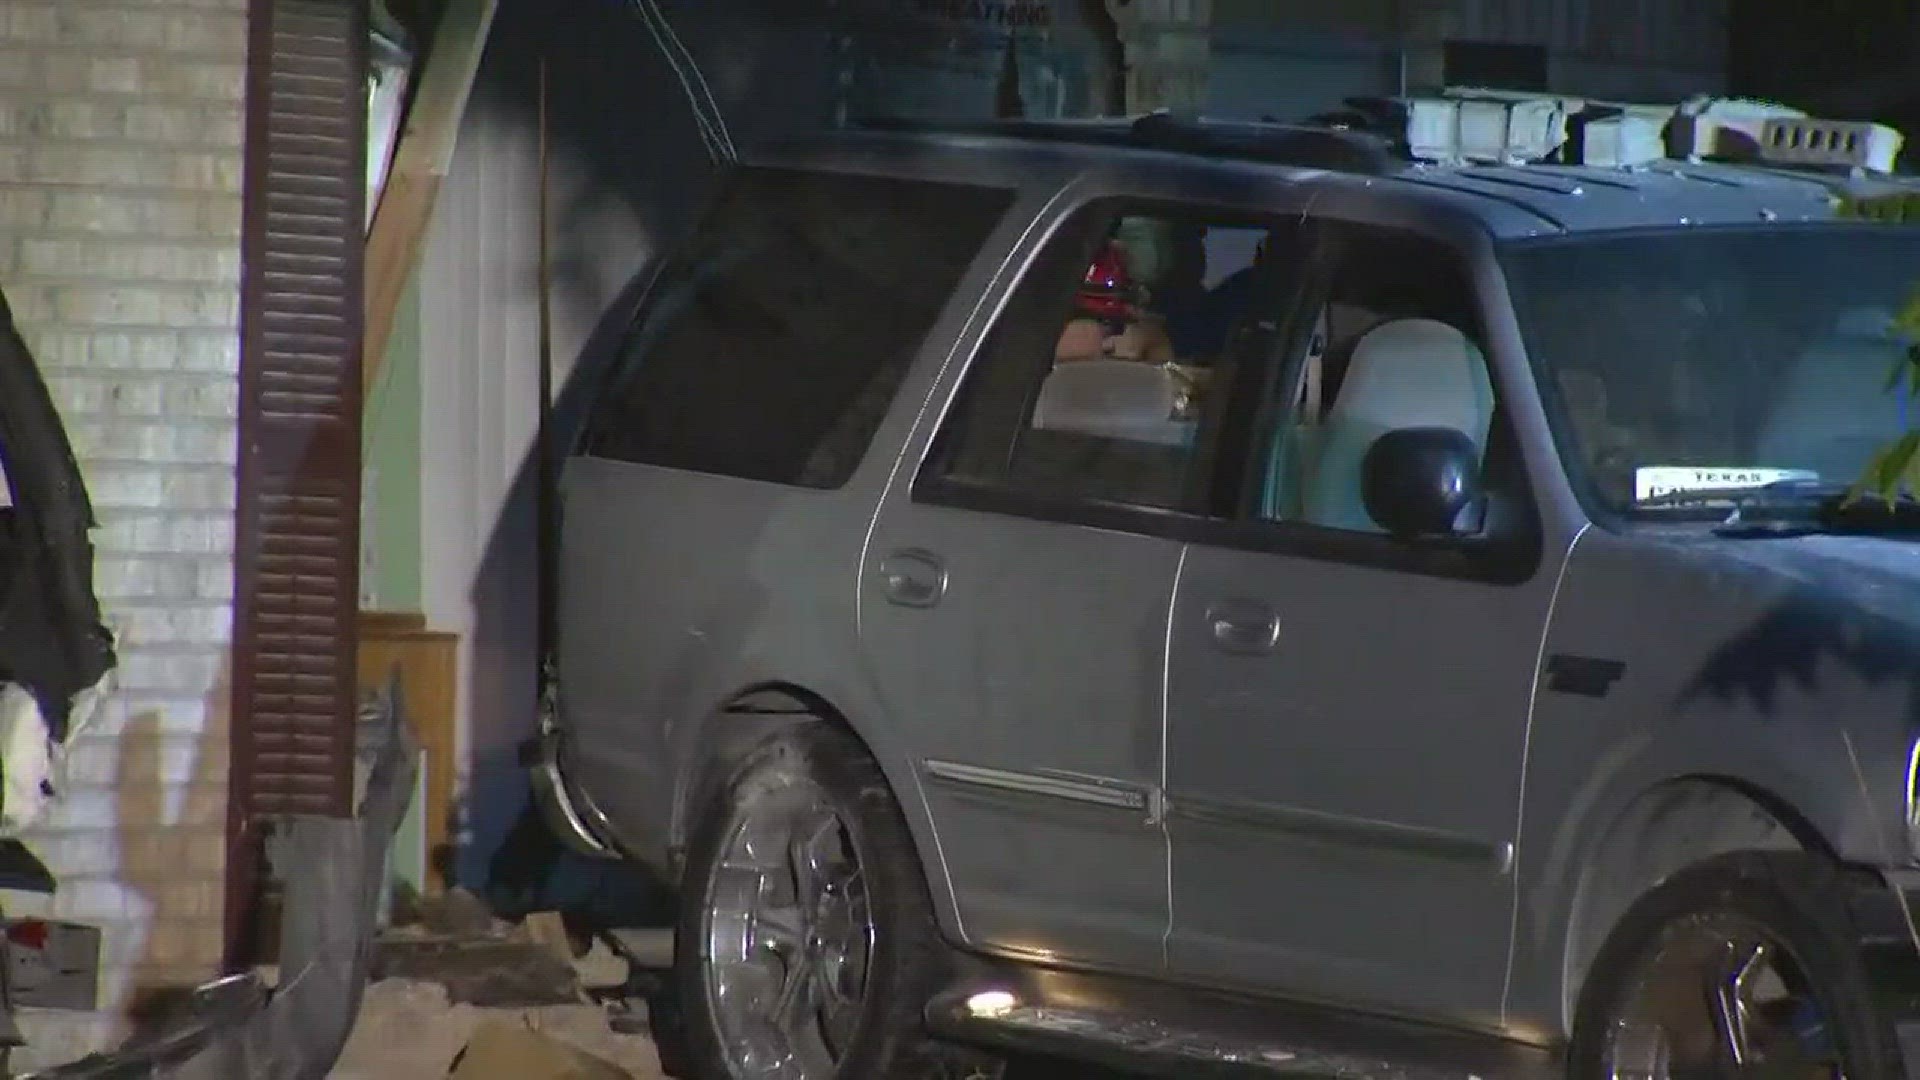 A 20-year-old driver plowed is facing DWI charges after crashing into two cars and driving through the wall of a family home in reverse on the city's far west side.